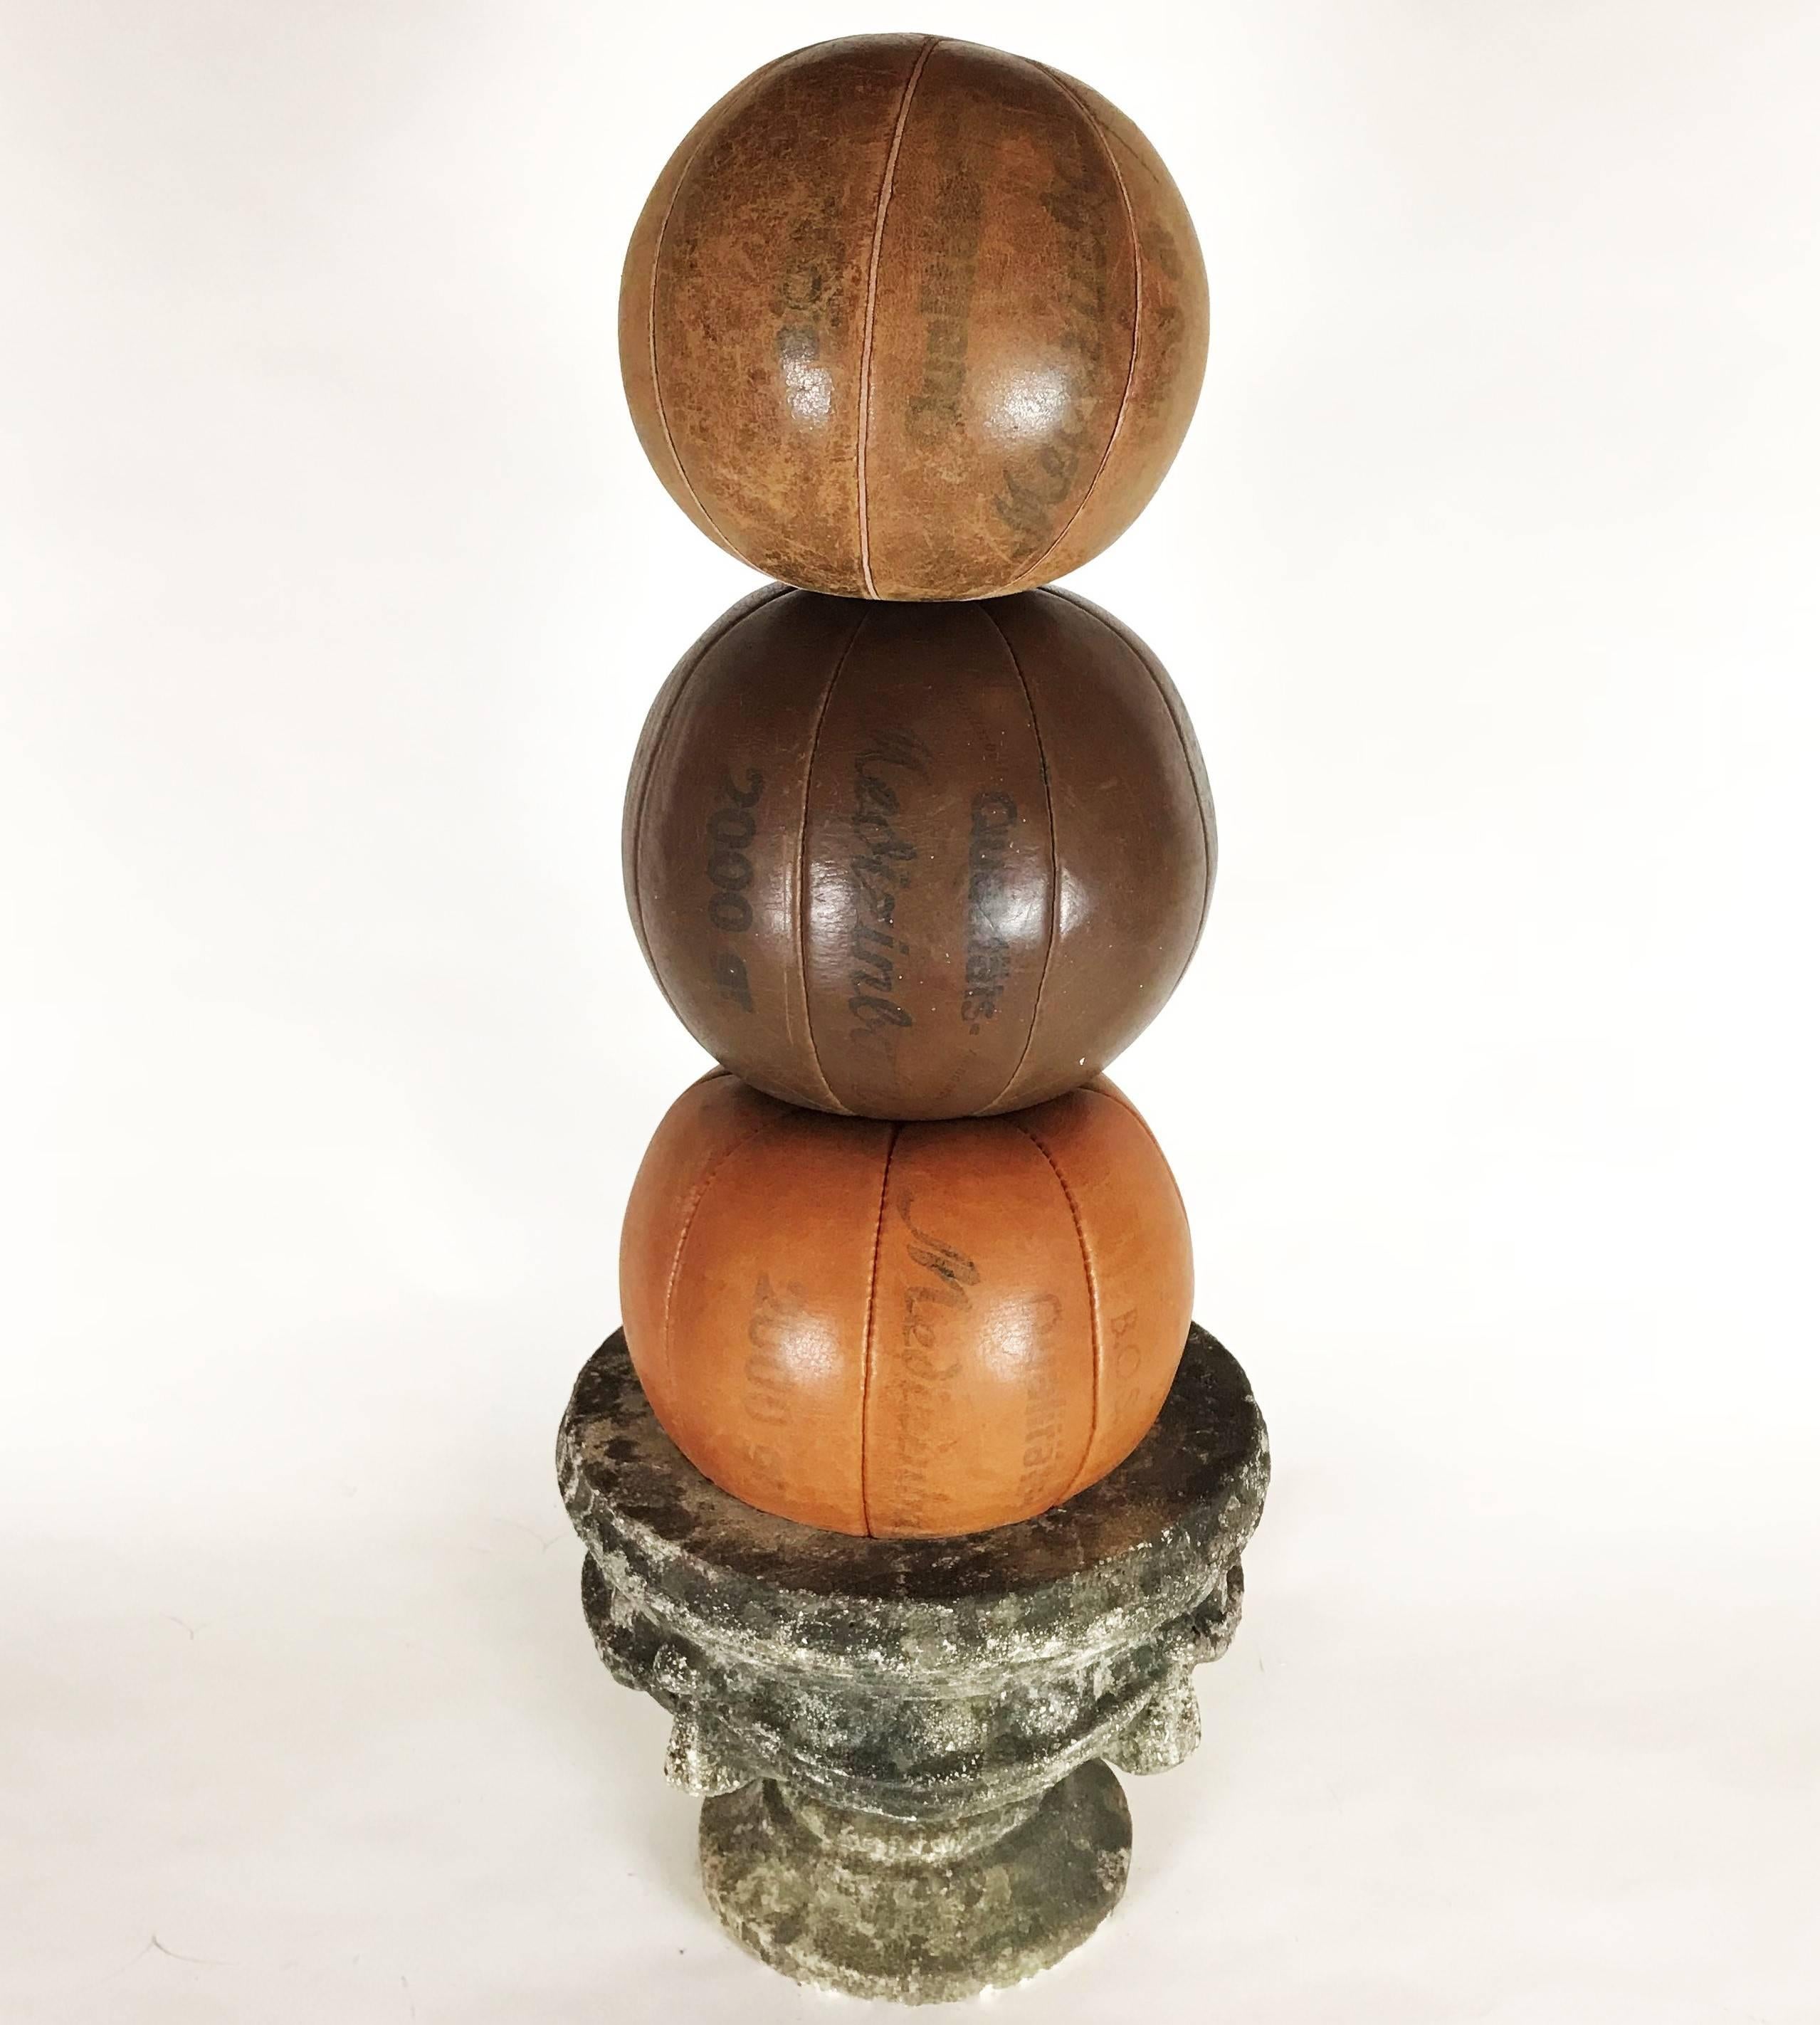 Three B.O.S leather balls. The medicine balls are part of a big collection from the 1920s-1930s, the time of the first gym enthusiasts in Europe. The balls are handmade, in a very good condition with nice patina and an intense color. 

Diameter: 23,